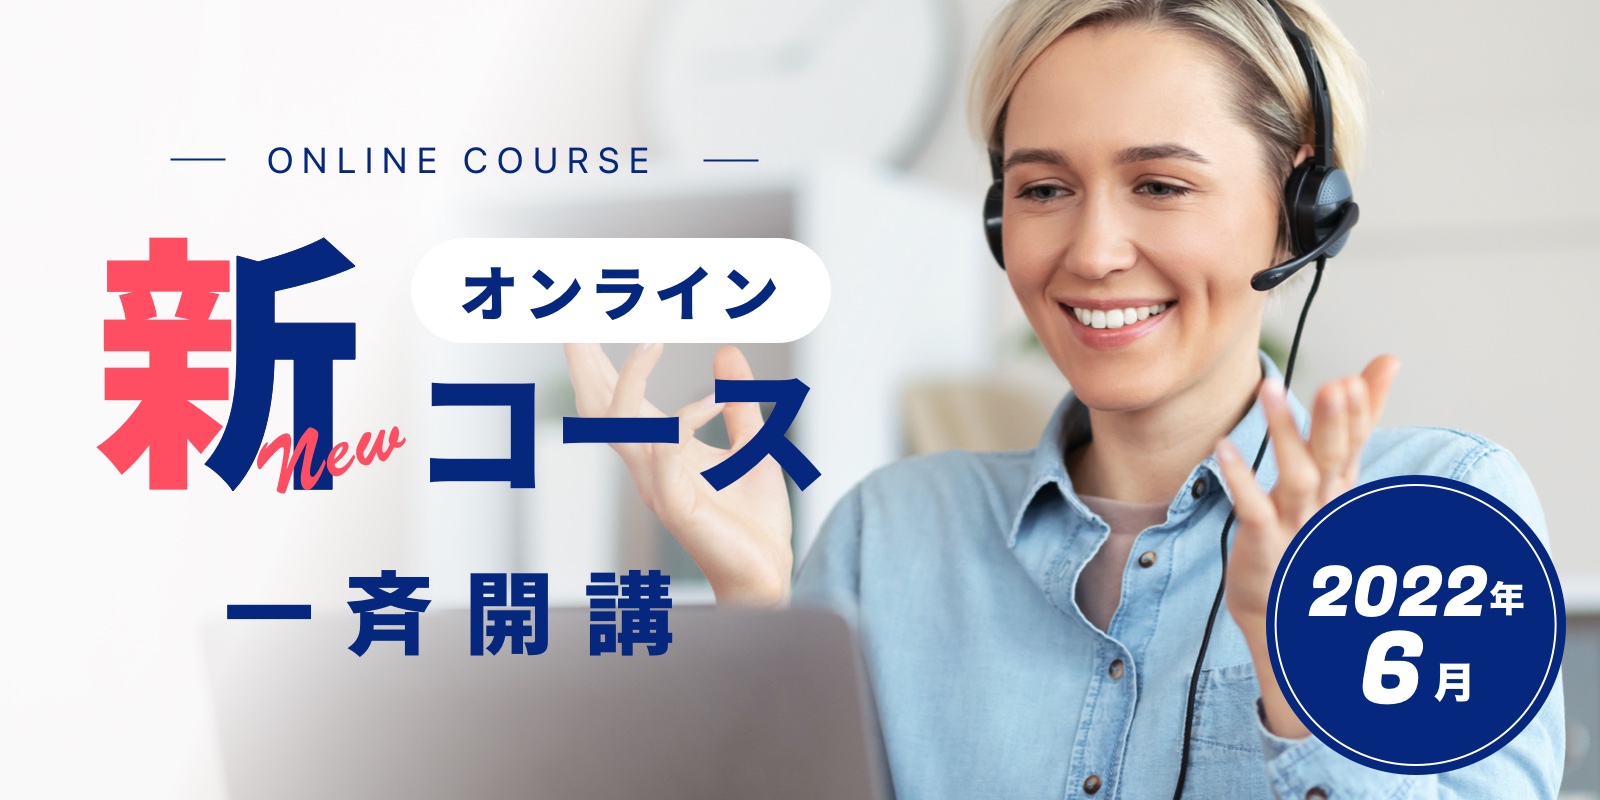 Online new course held all at once